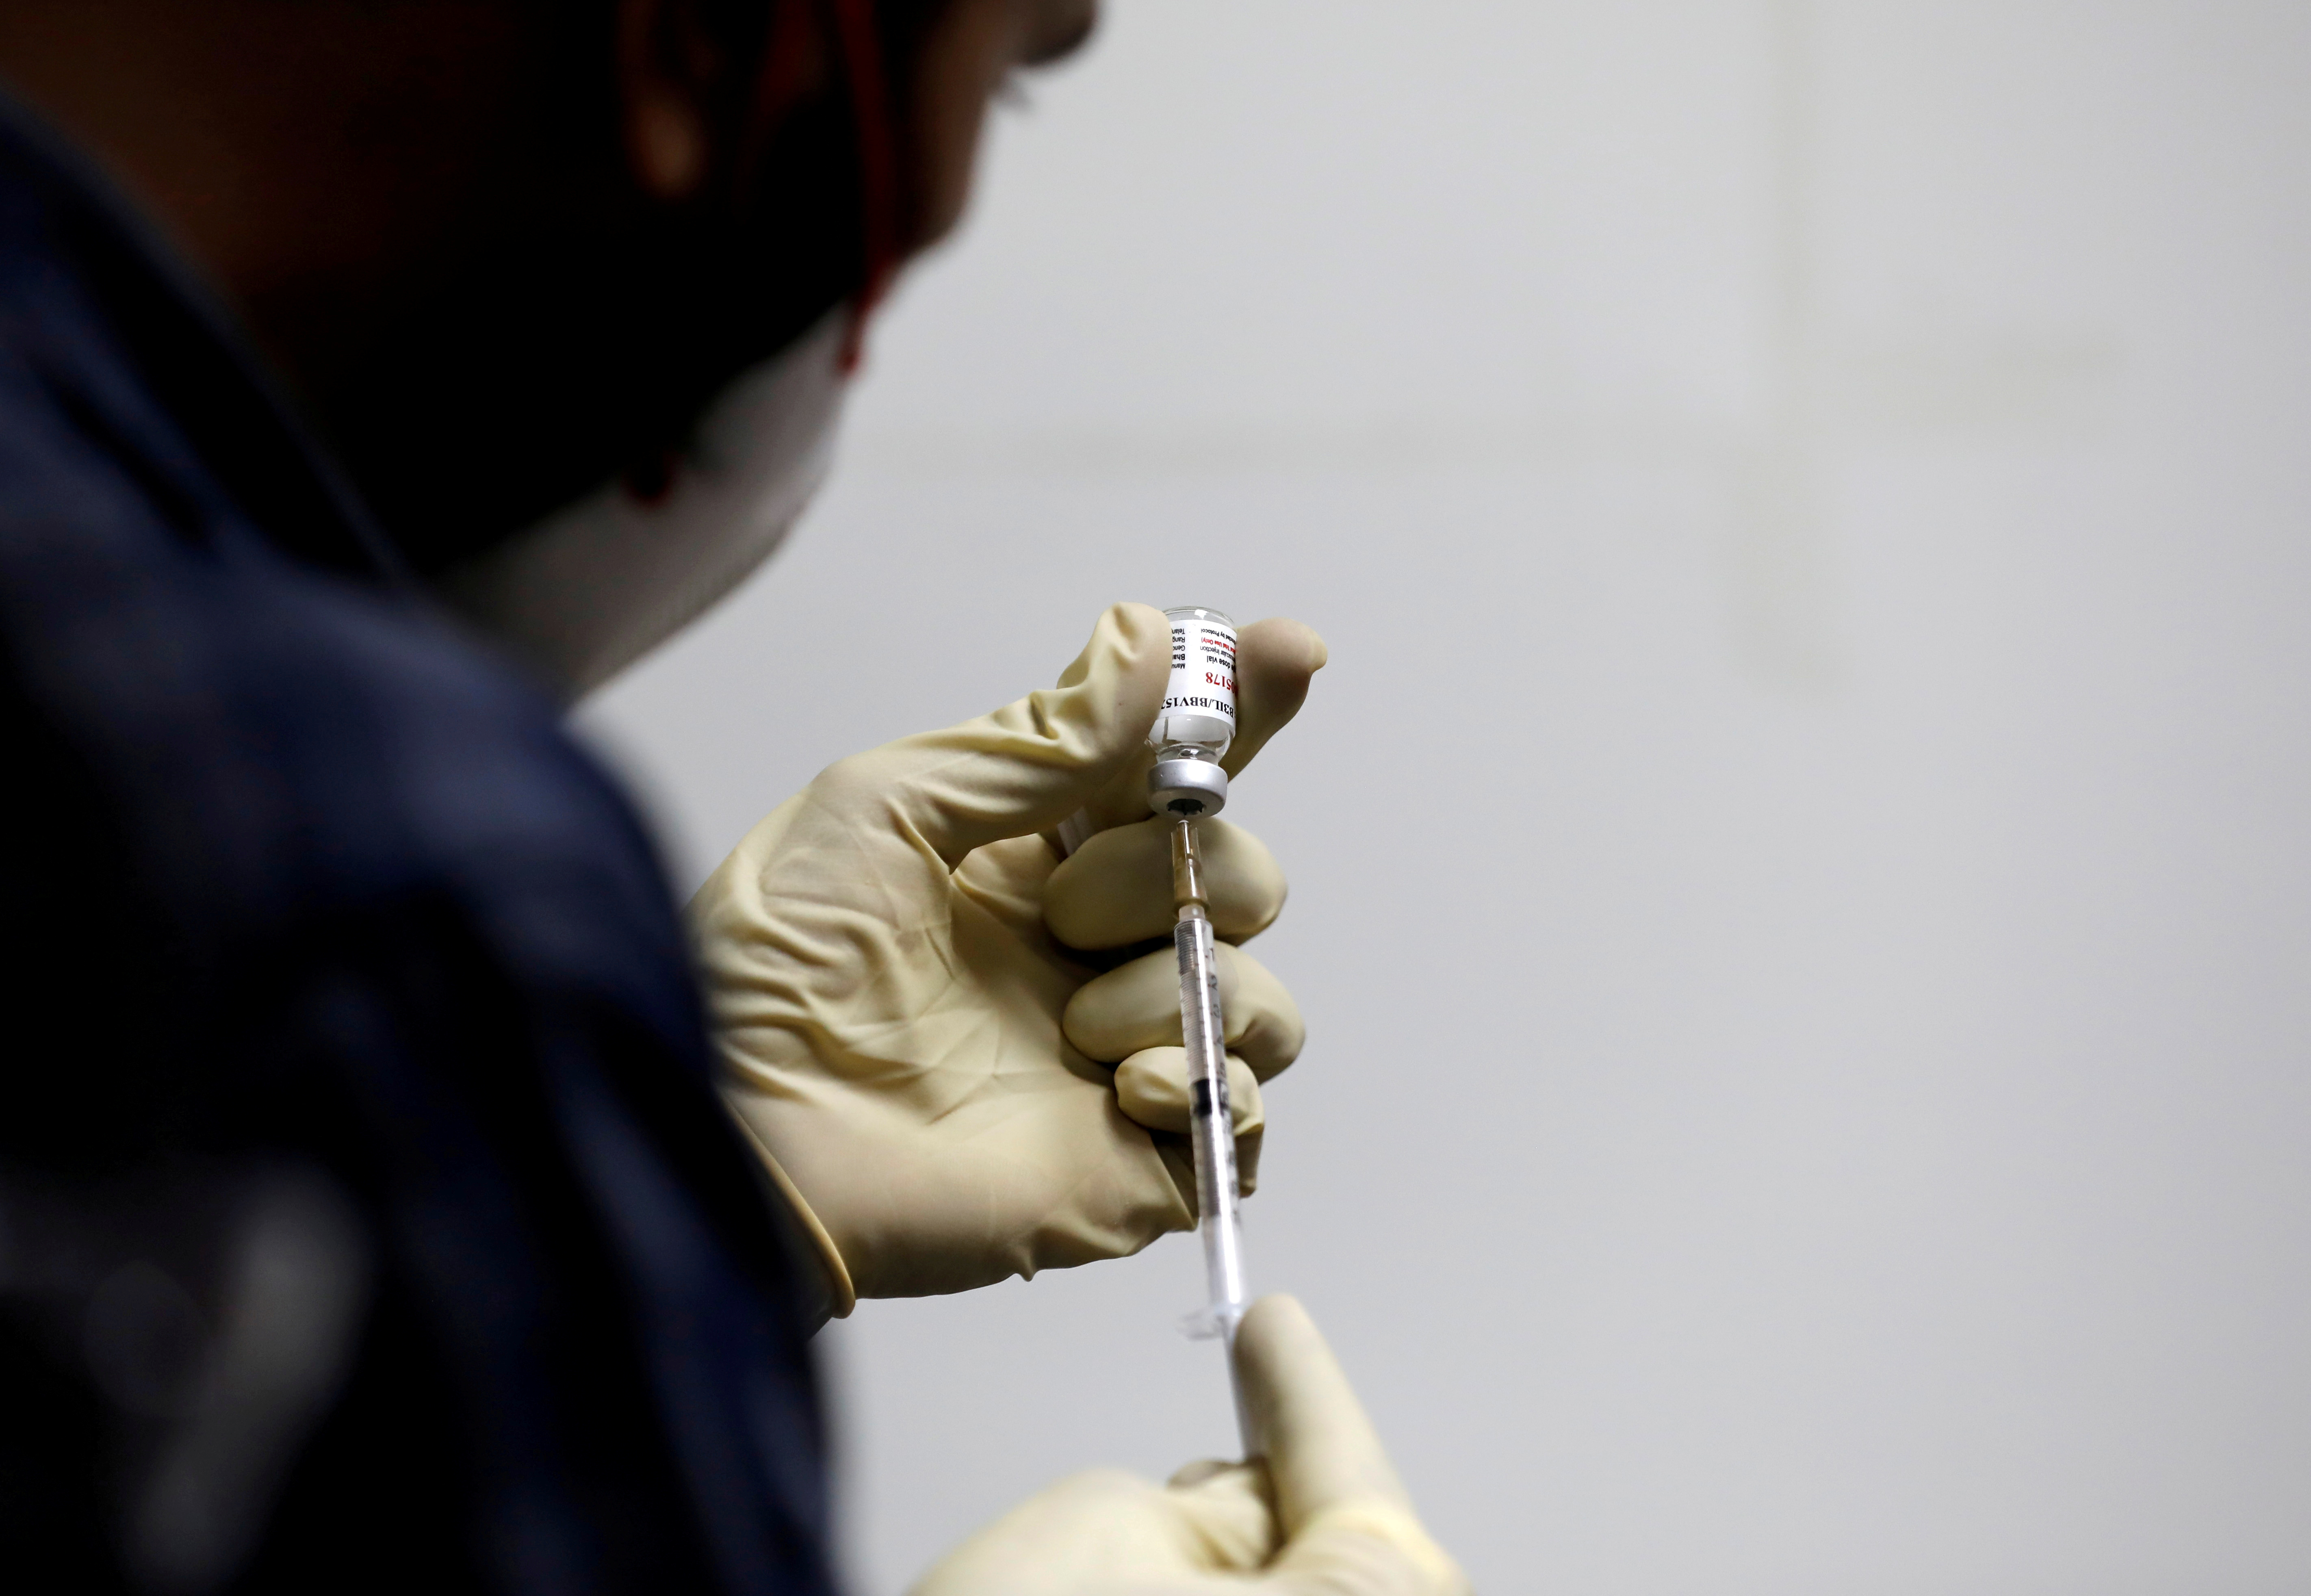 A medic fills a syringe with COVAXIN, an Indian government-backed experimental COVID-19 vaccine, before administering it to a health worker during its trials, in Ahmedabad